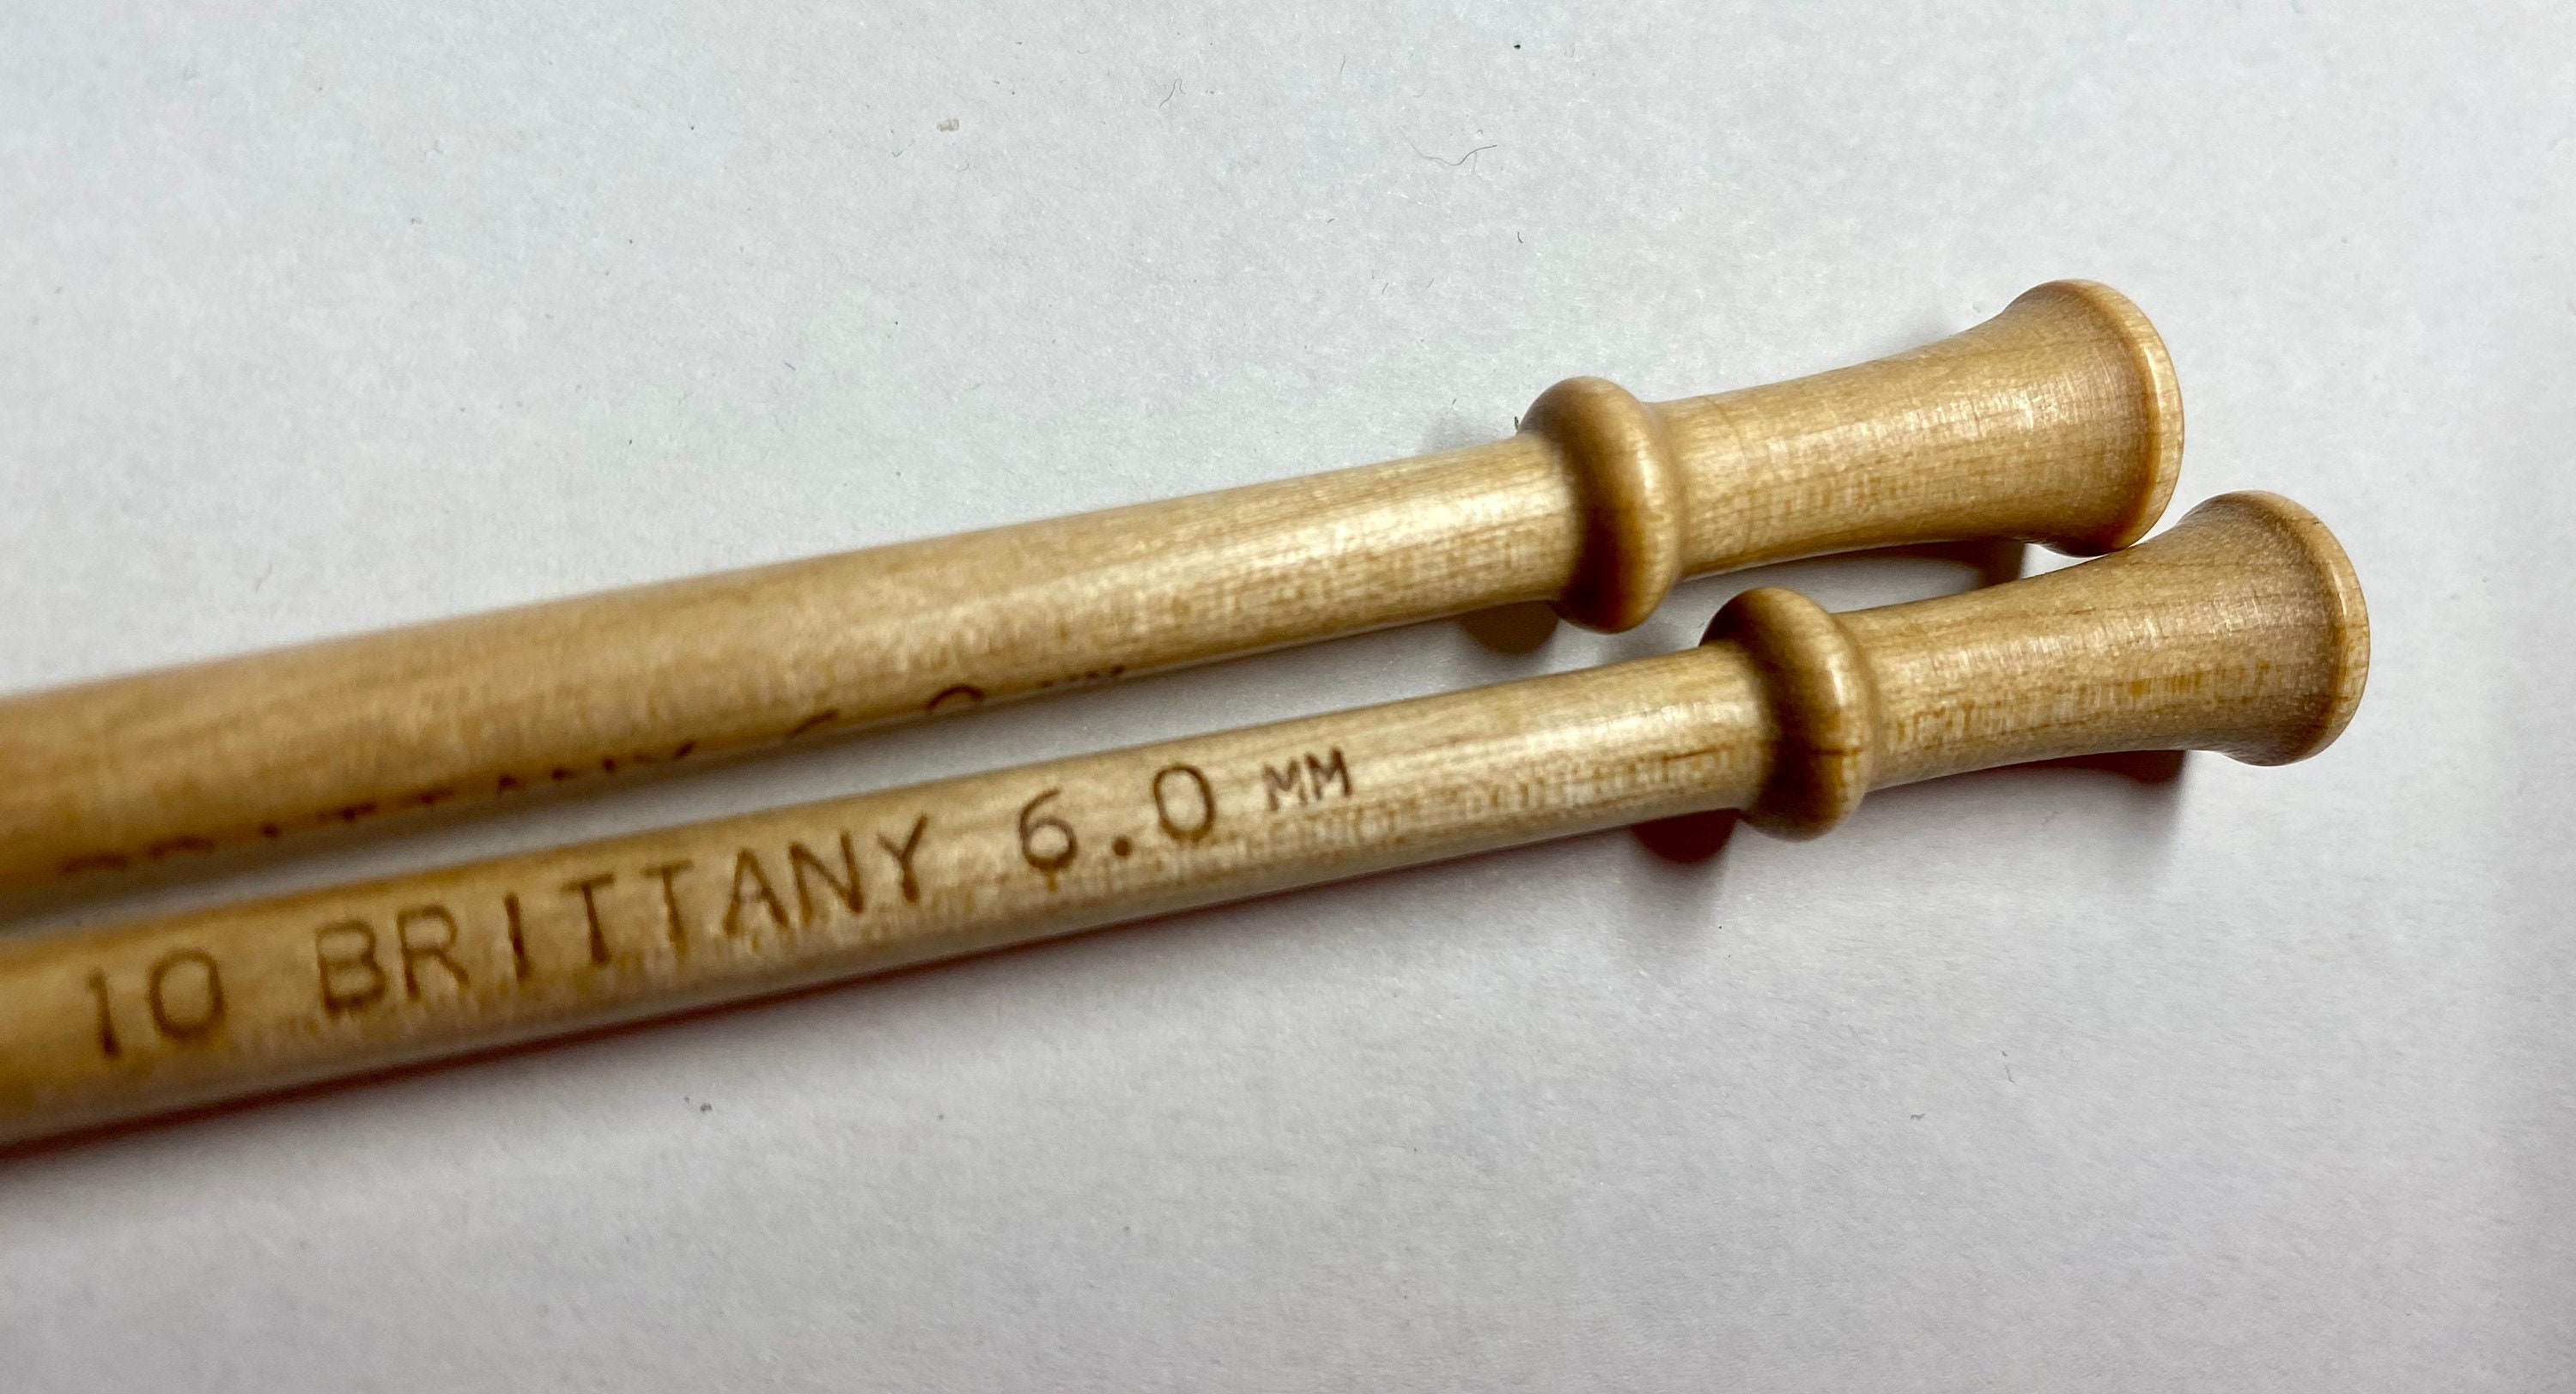  Brittany Single Point Knitting Needles 10-Size 5/3.75mm :  Arts, Crafts & Sewing